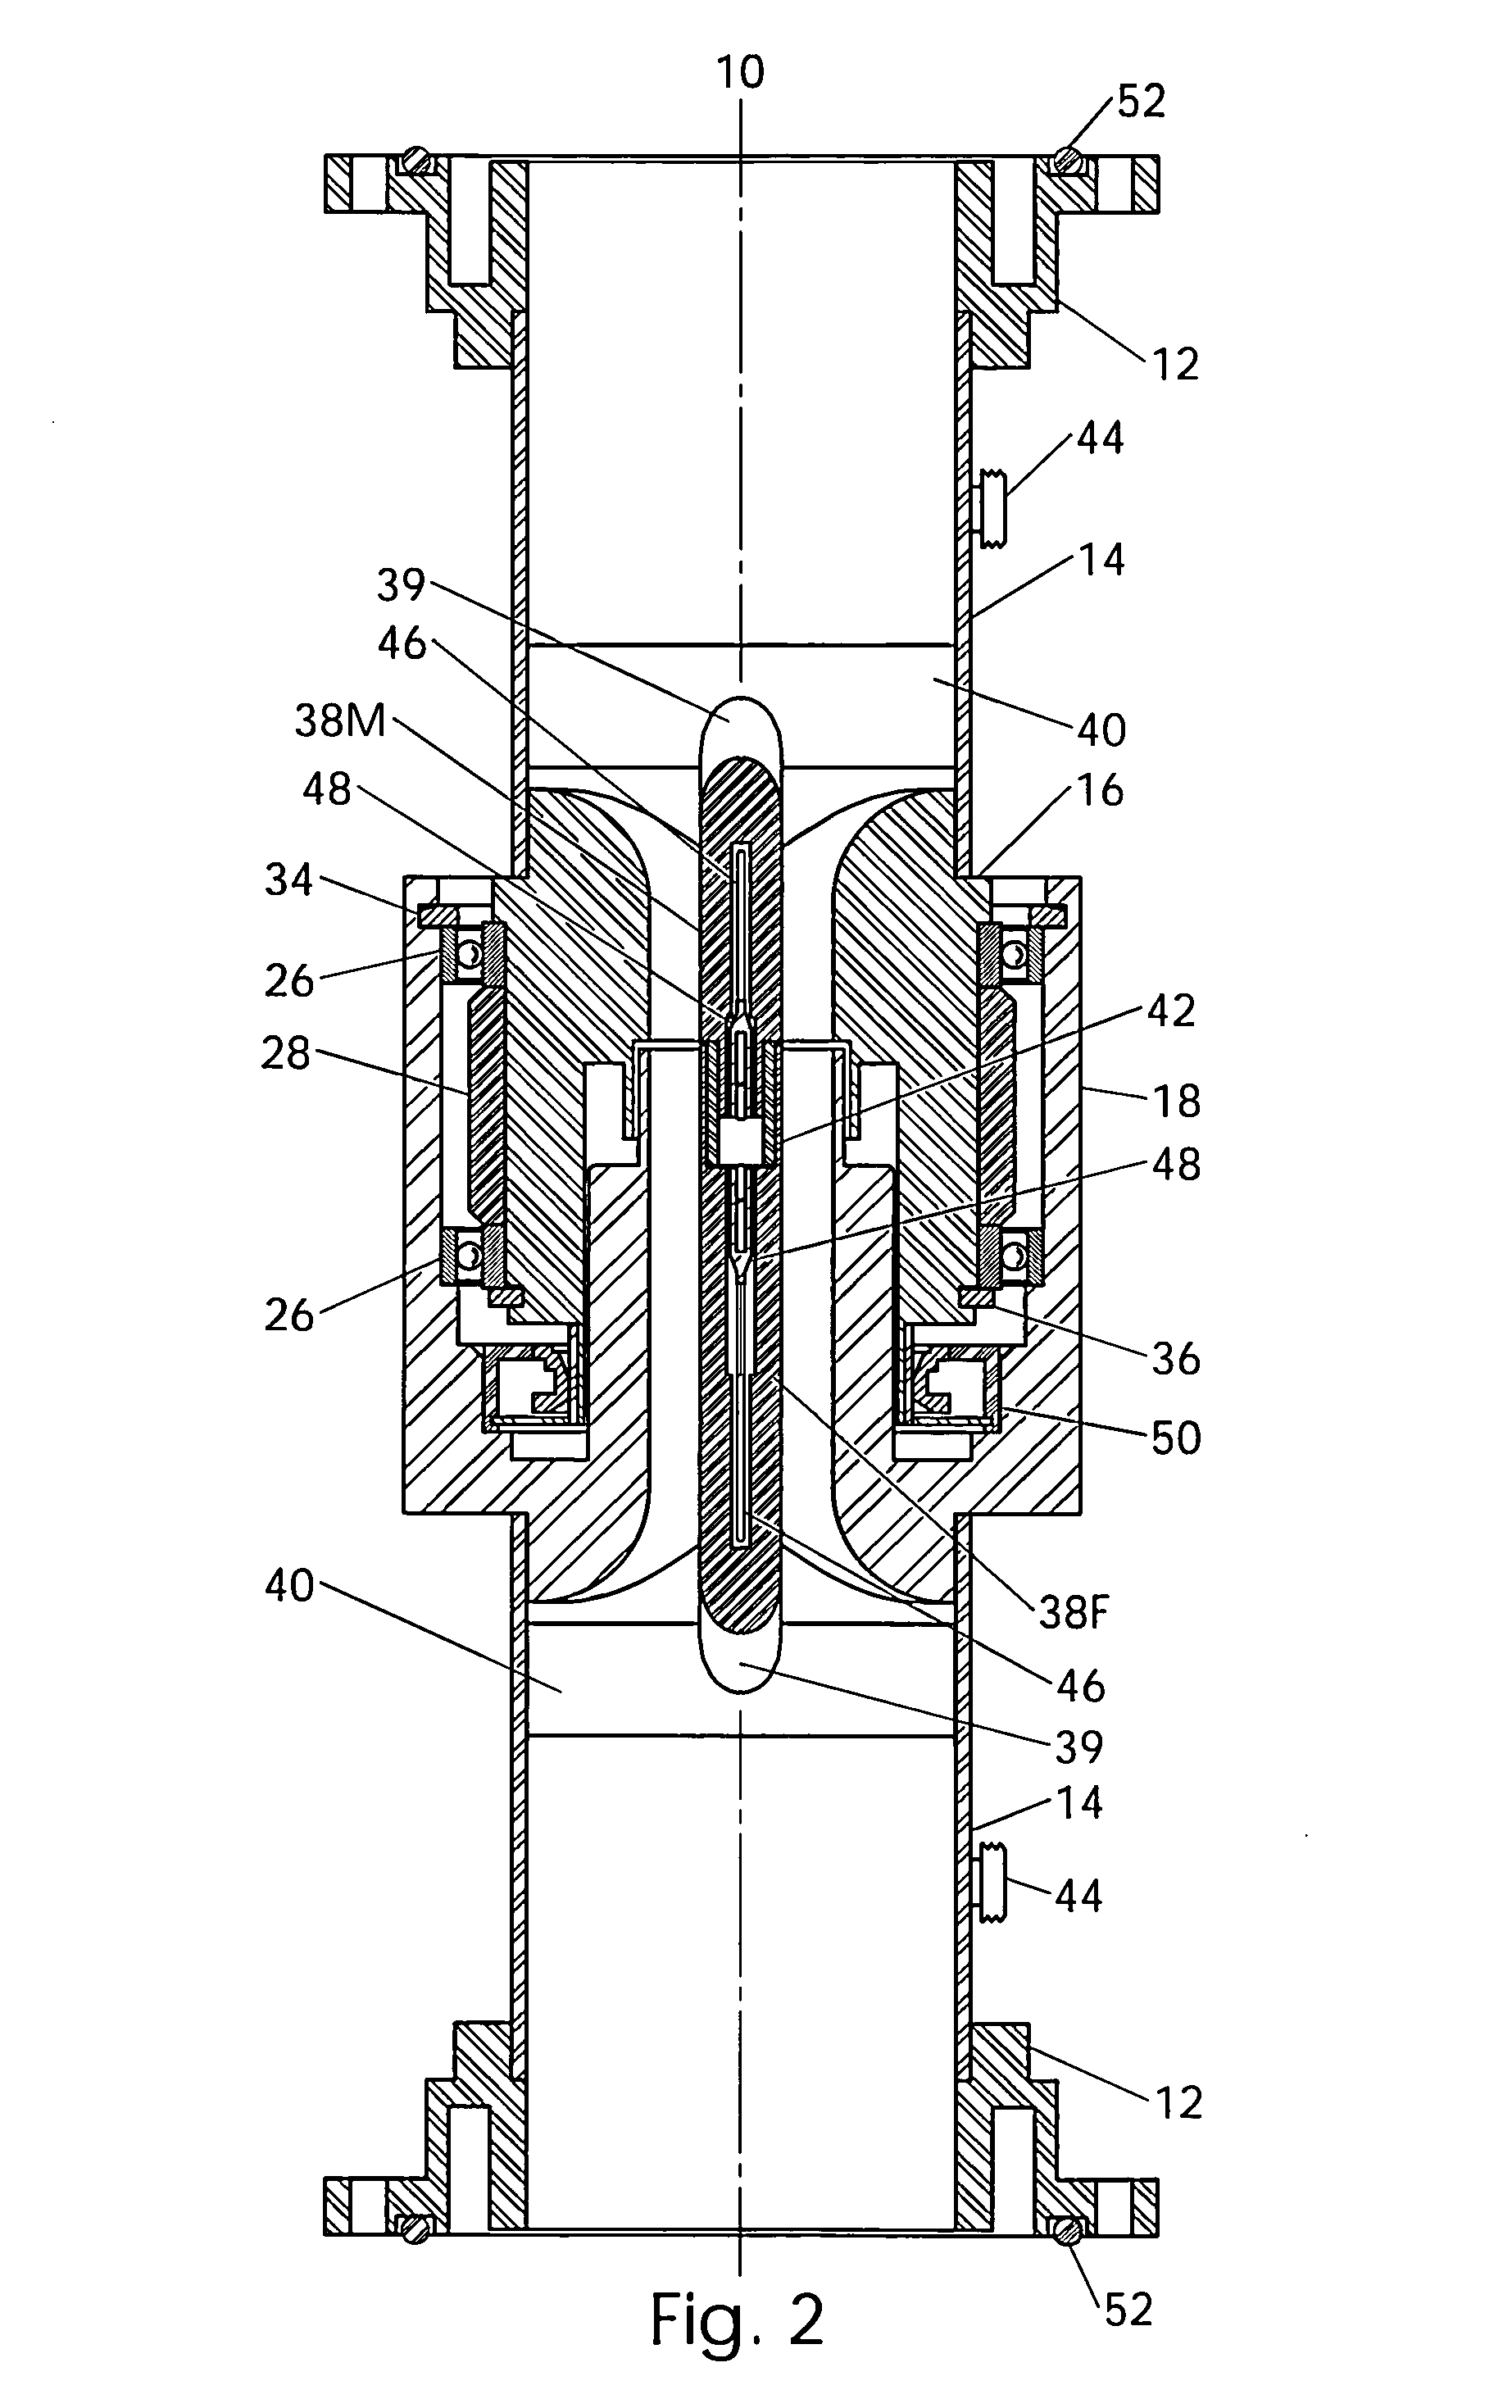 Rotary joint for radio frequency electromagnetic waves and light waves